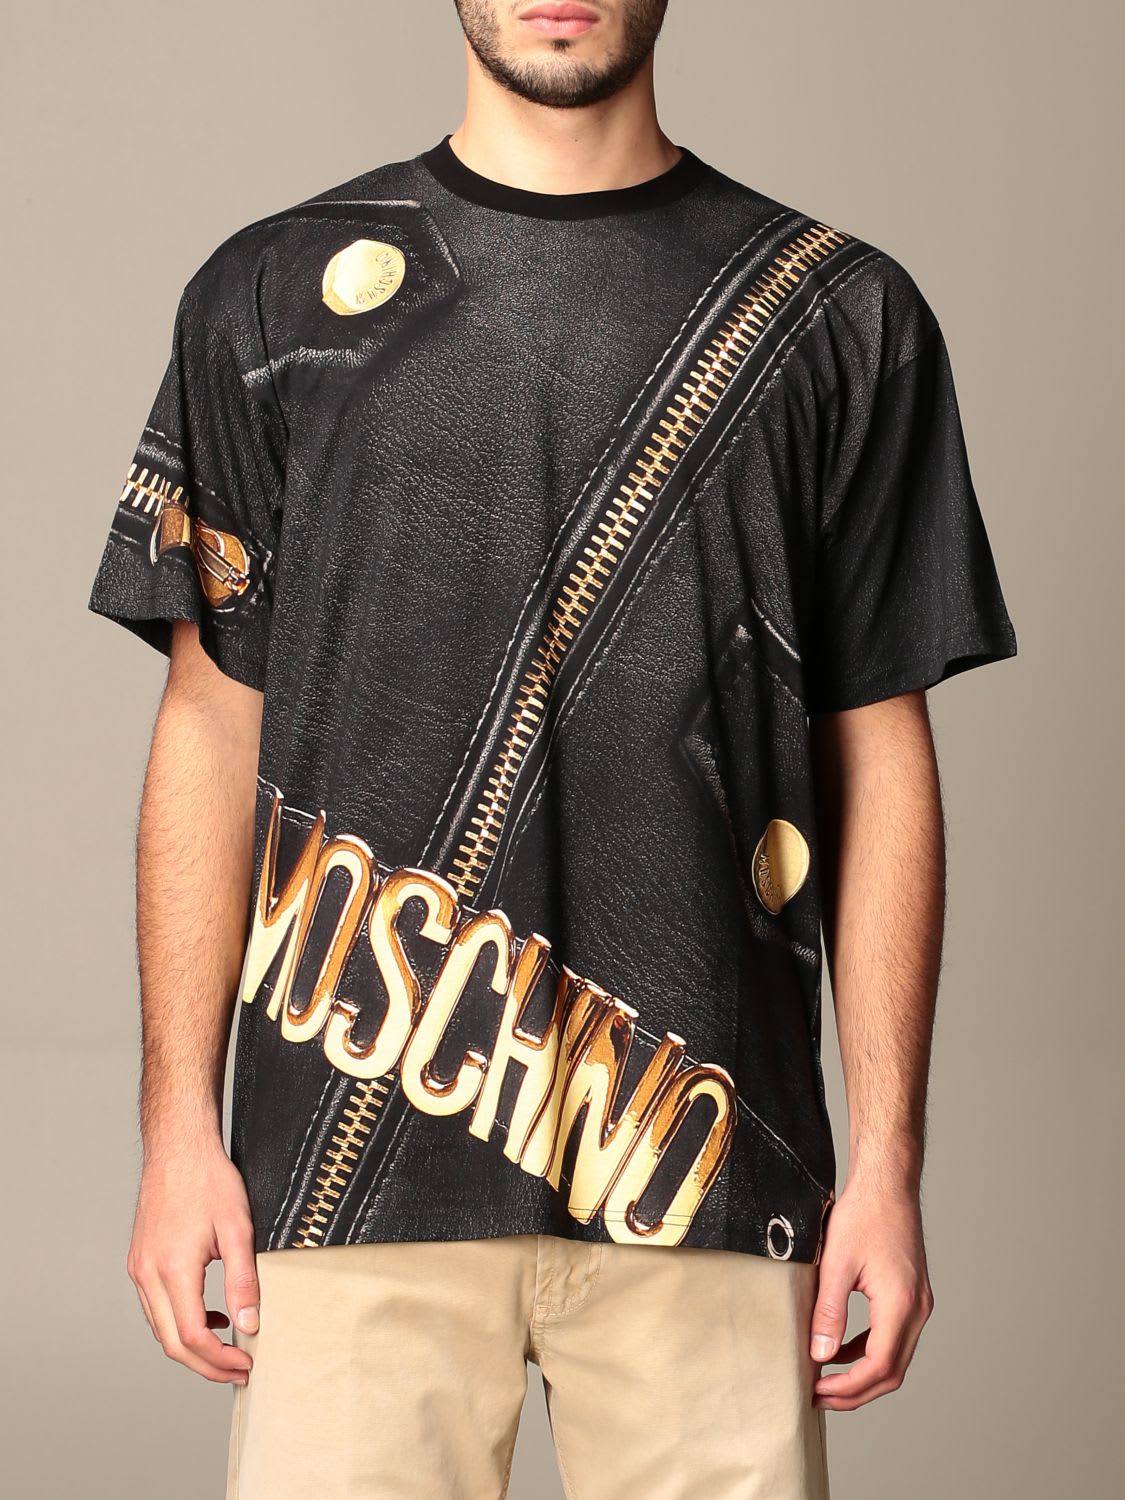 moschino couture t shirt mens